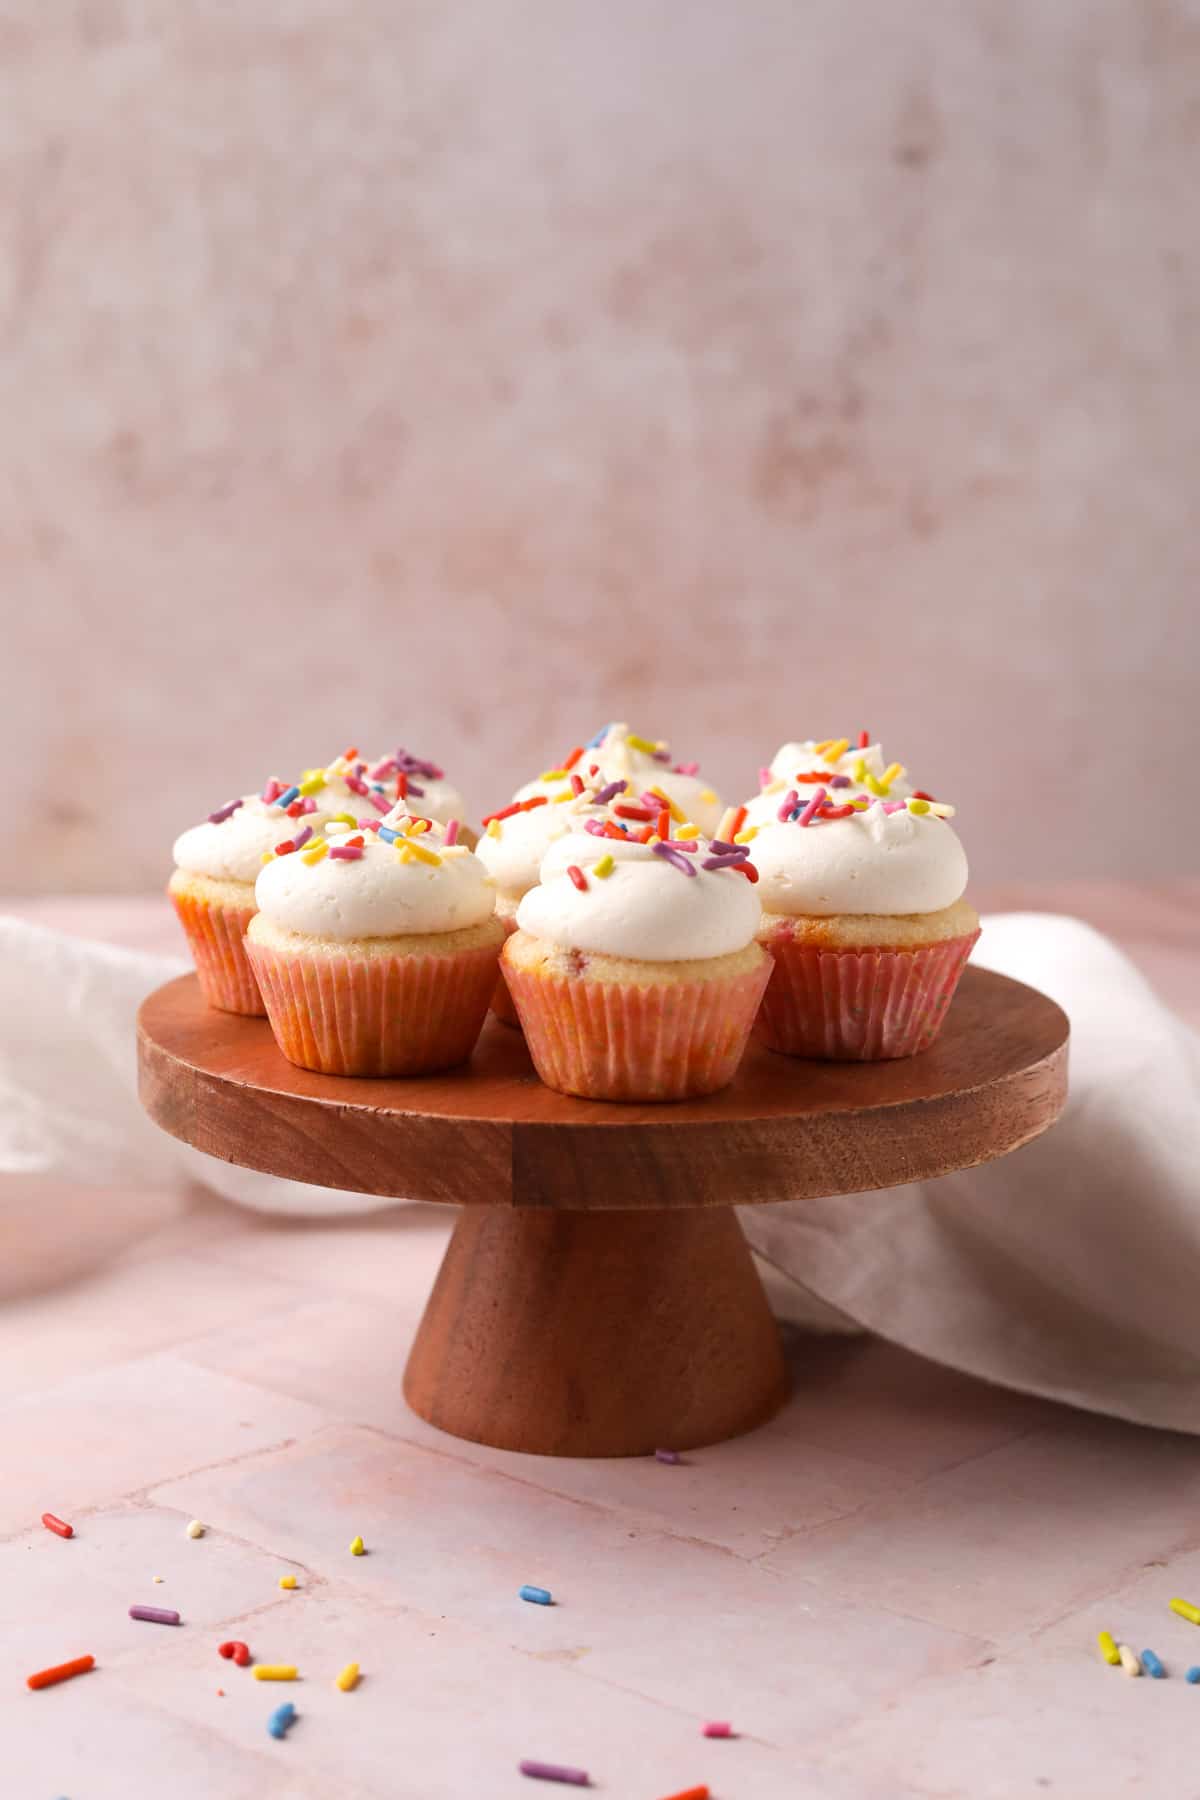 Mini funfetti cupcakes with vanilla buttercream and sprinkles on a wood cake stand.